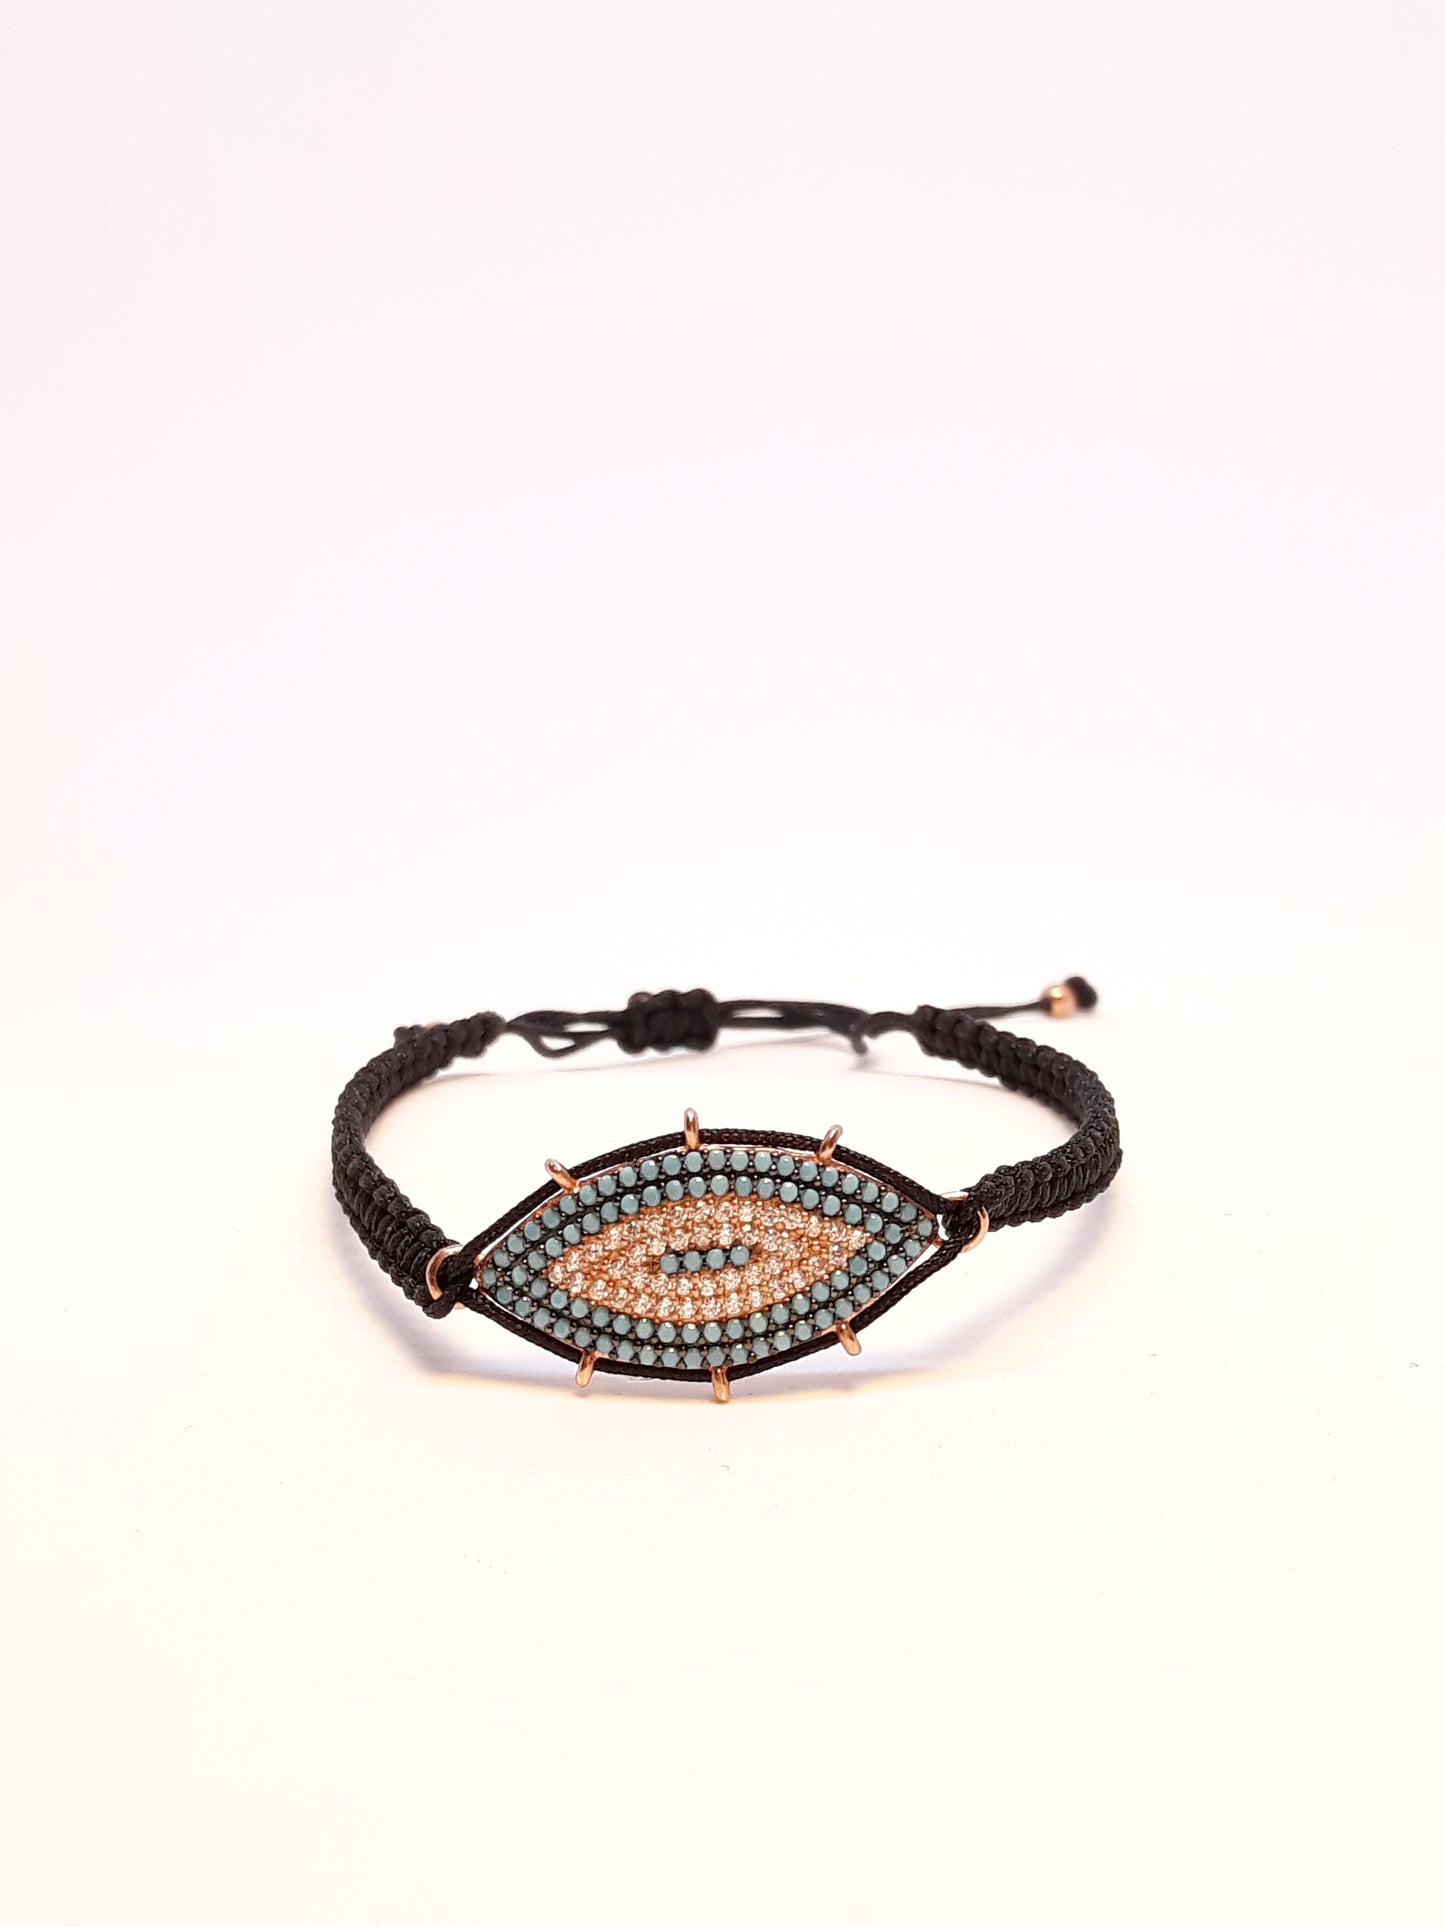 Evil Eye Bracelet "Mati macrame, silver 925 rosegold-plated with Turquoise, zircons semi-precious stones Symbols Collection